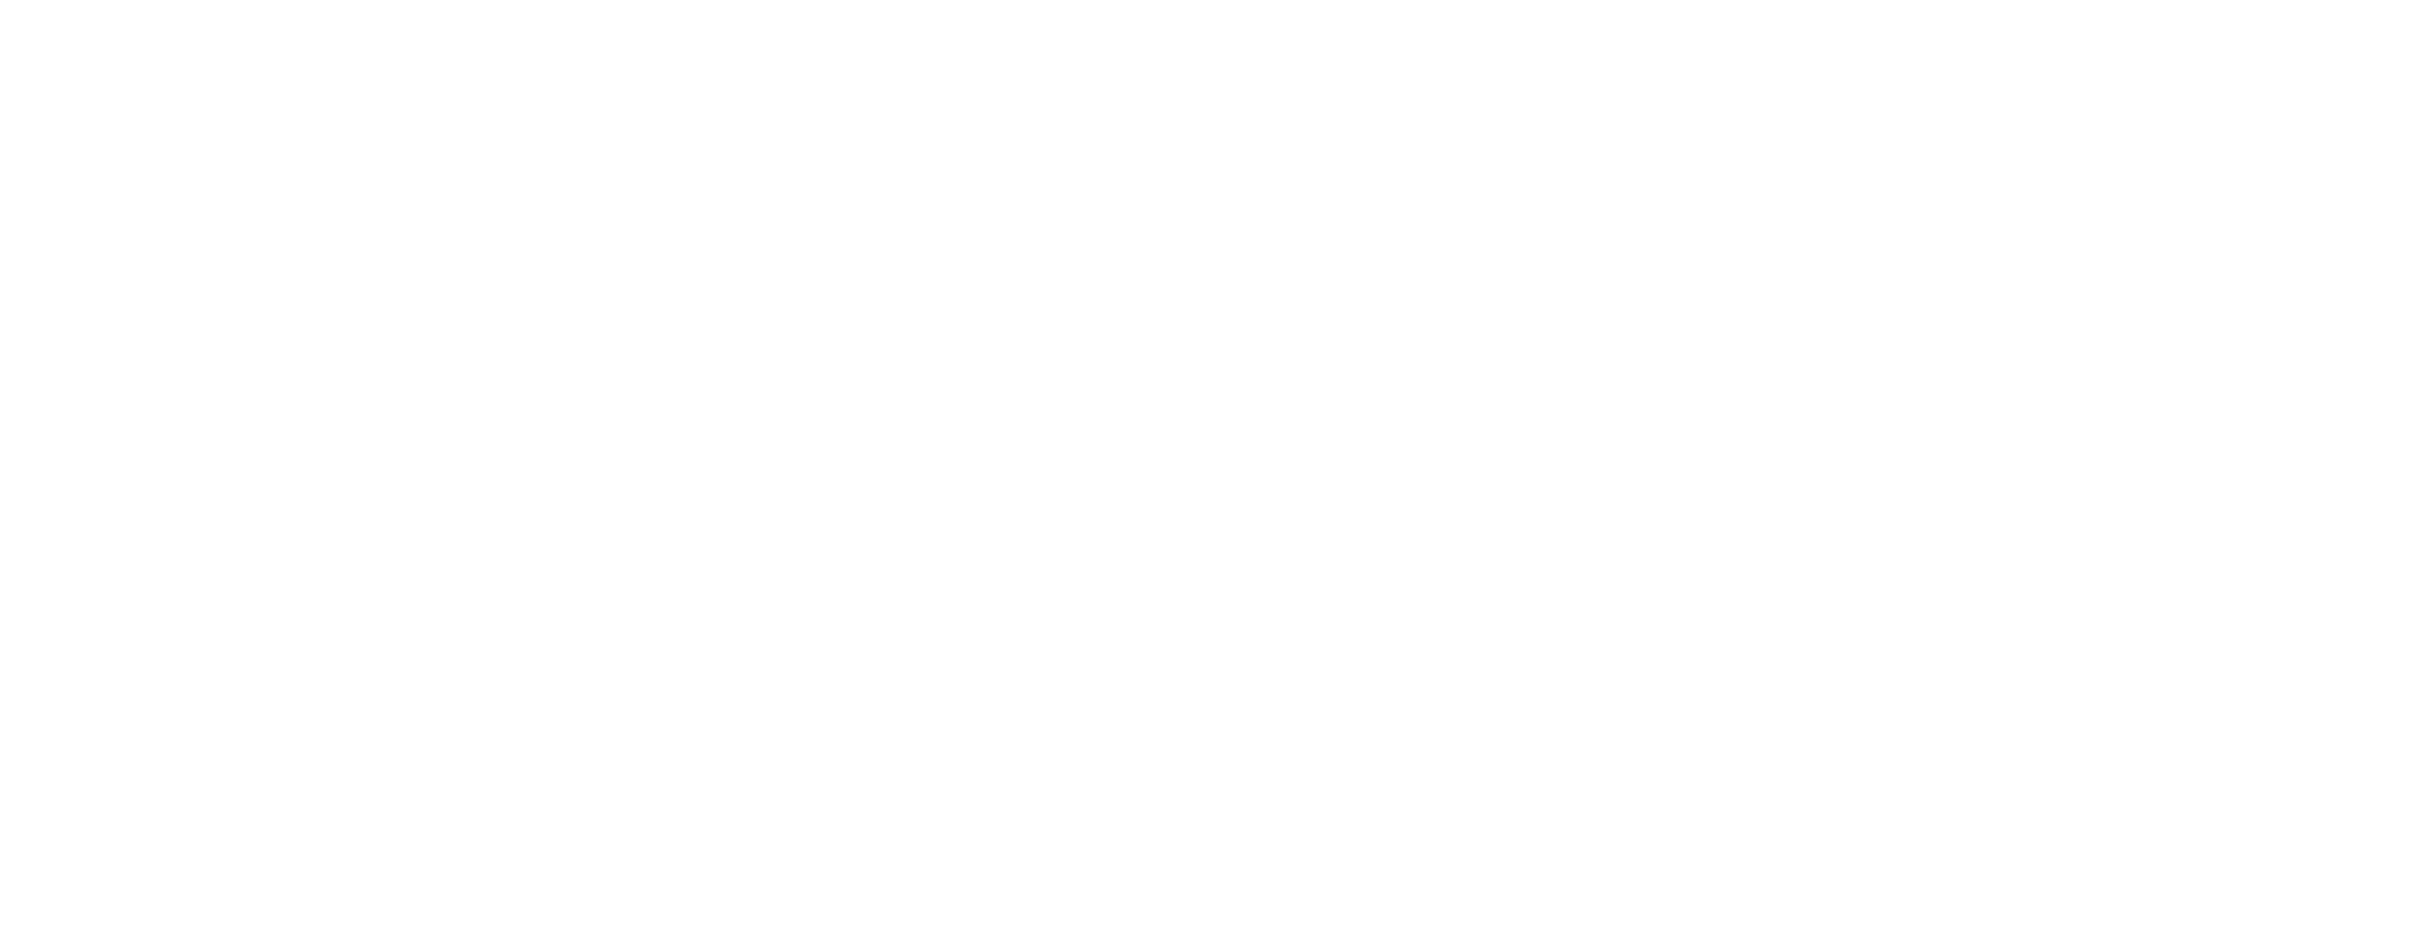 Falls Count Anywhere